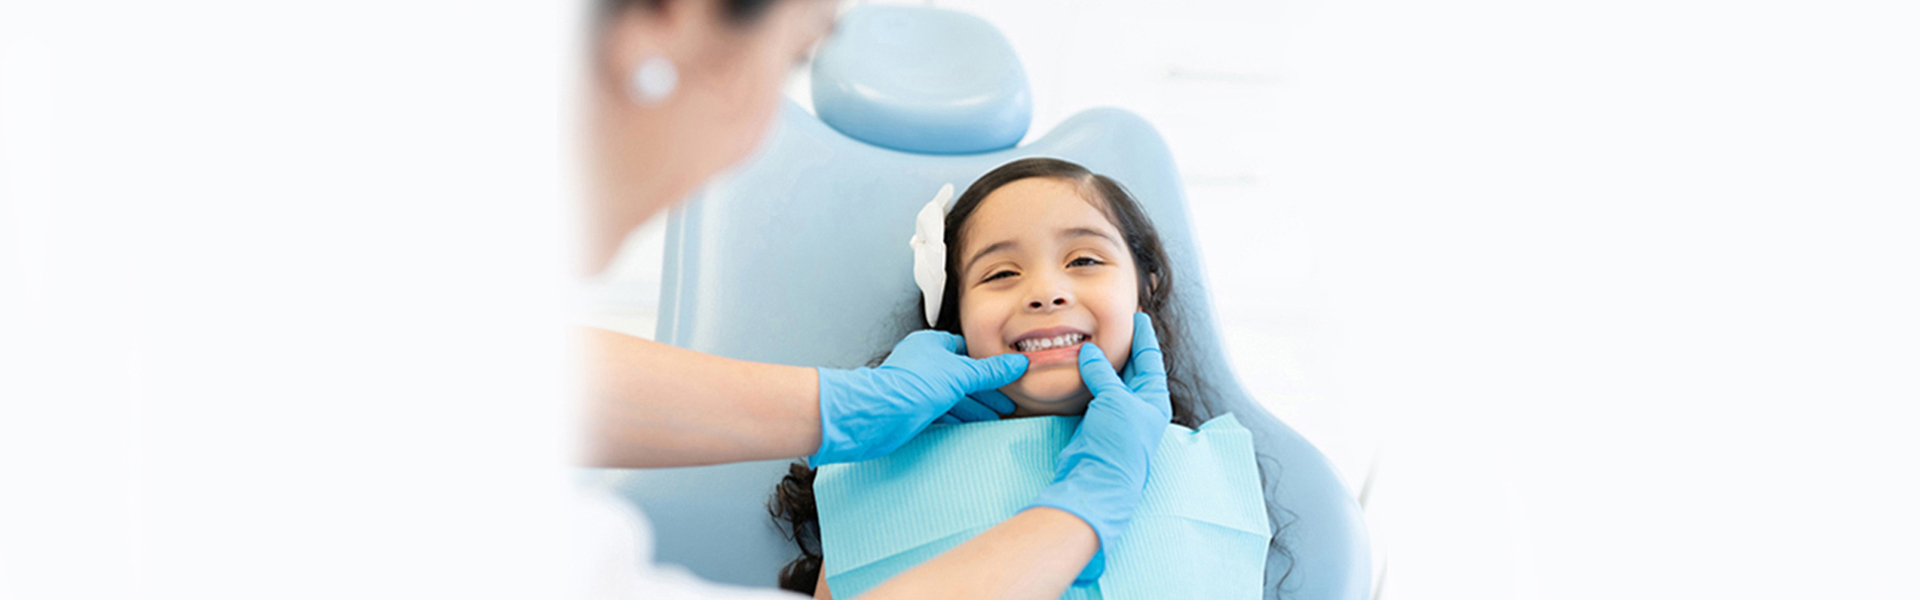 Giggles and Grins: A Playful Guide to Early Dental Education for Kids in Yuba City, CA